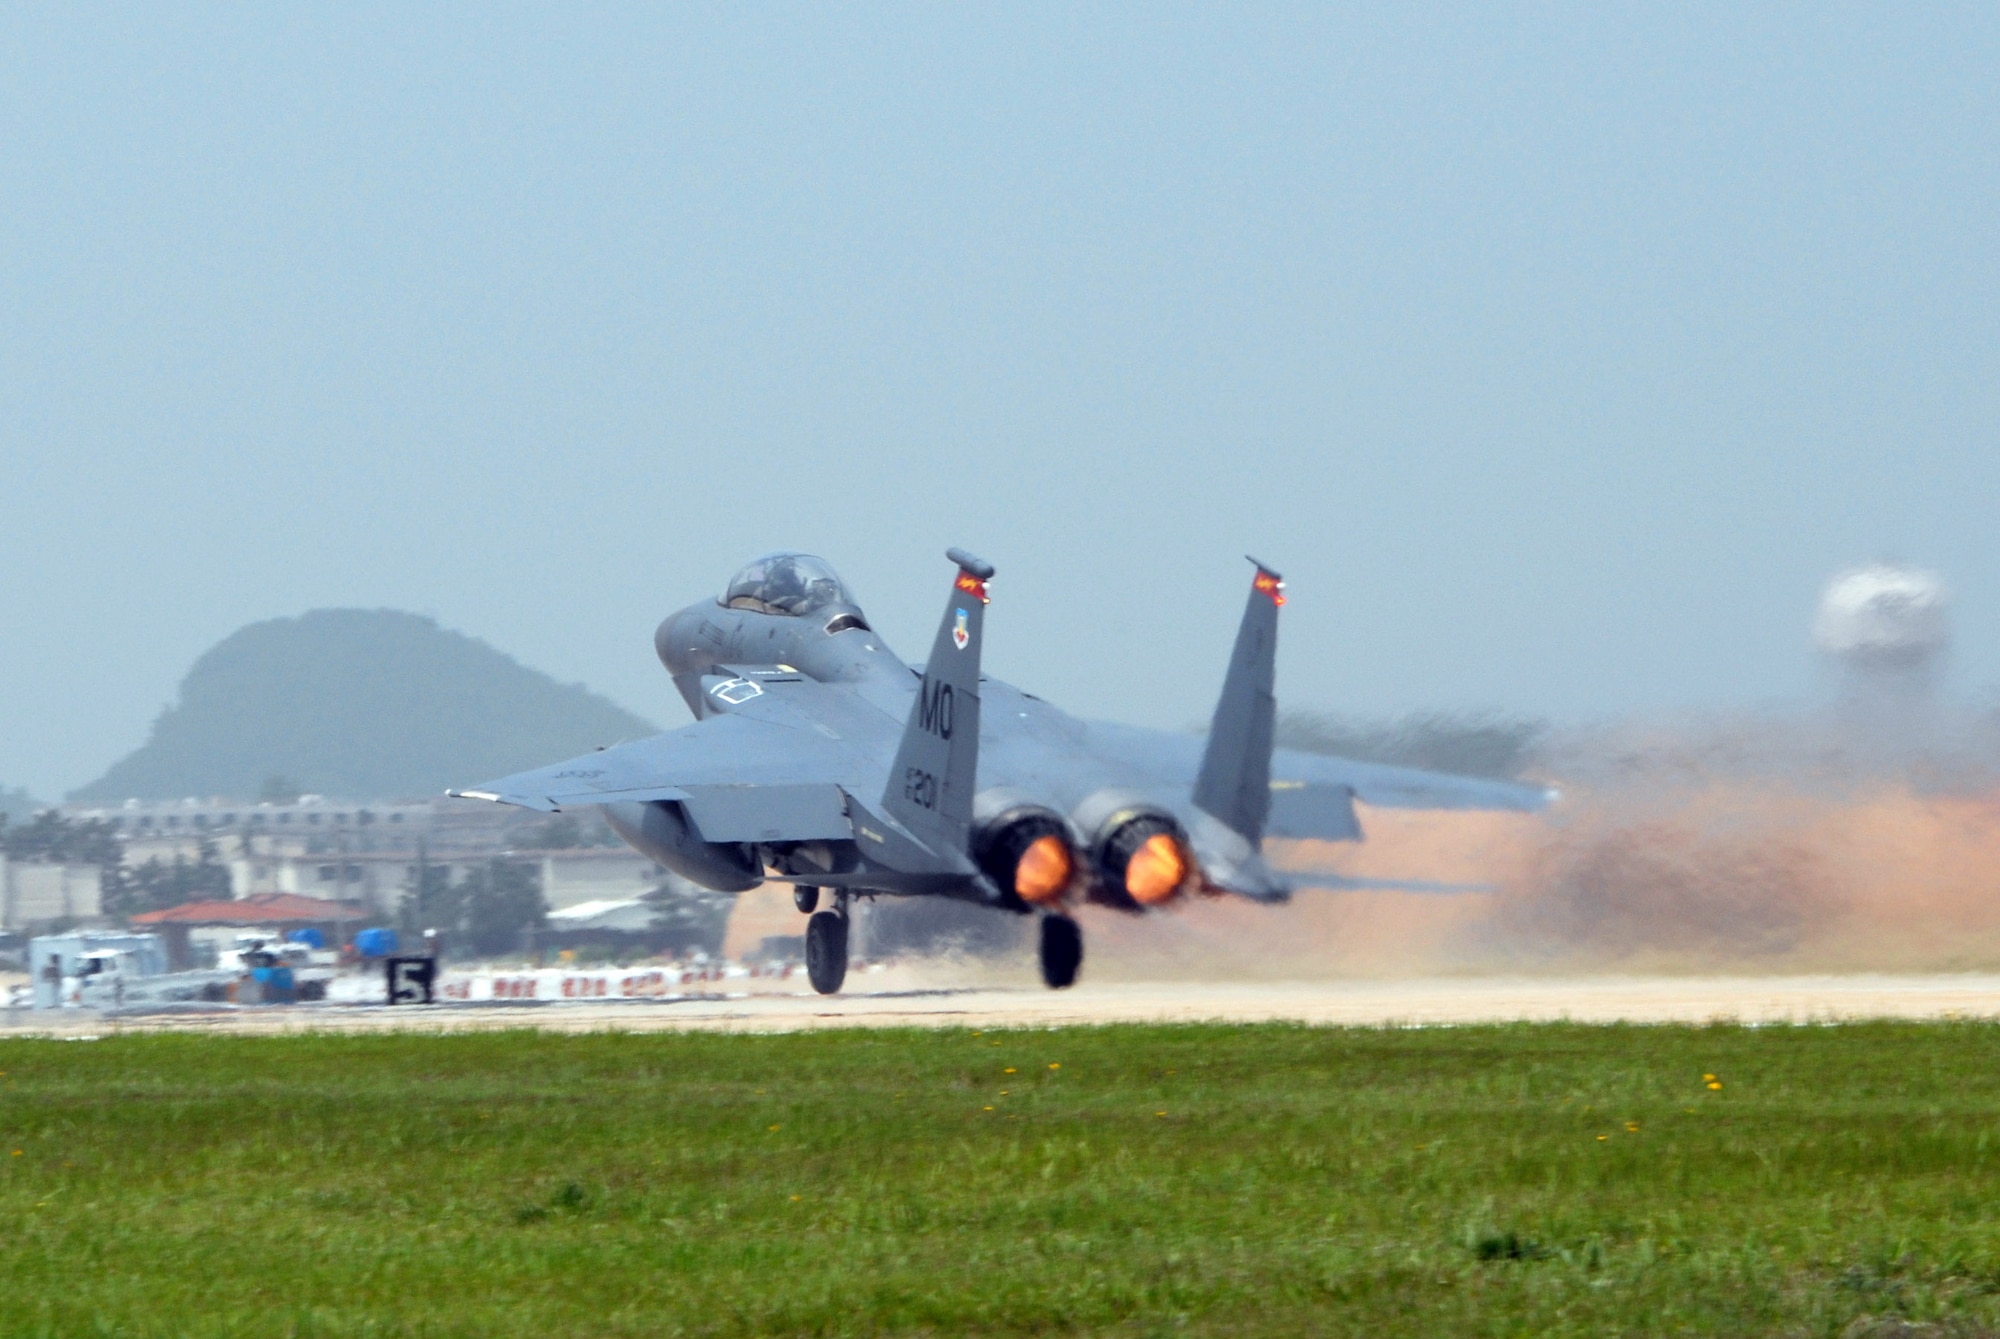 An F-15E Strike Eagle from Mountain Home Air Force Base, Idaho, takes off during Exercise Max Thunder June 19 at Kunsan Air Base, South Korea. Training side-by-side is part of day-to-day operations for Korean and U.S. Air Force memebers at Kunsan AB. The bi-lateral training received during Exercise Max Thunder will improve interoperability. (US Air Force photo/Senior Airman Angela Ruiz) 